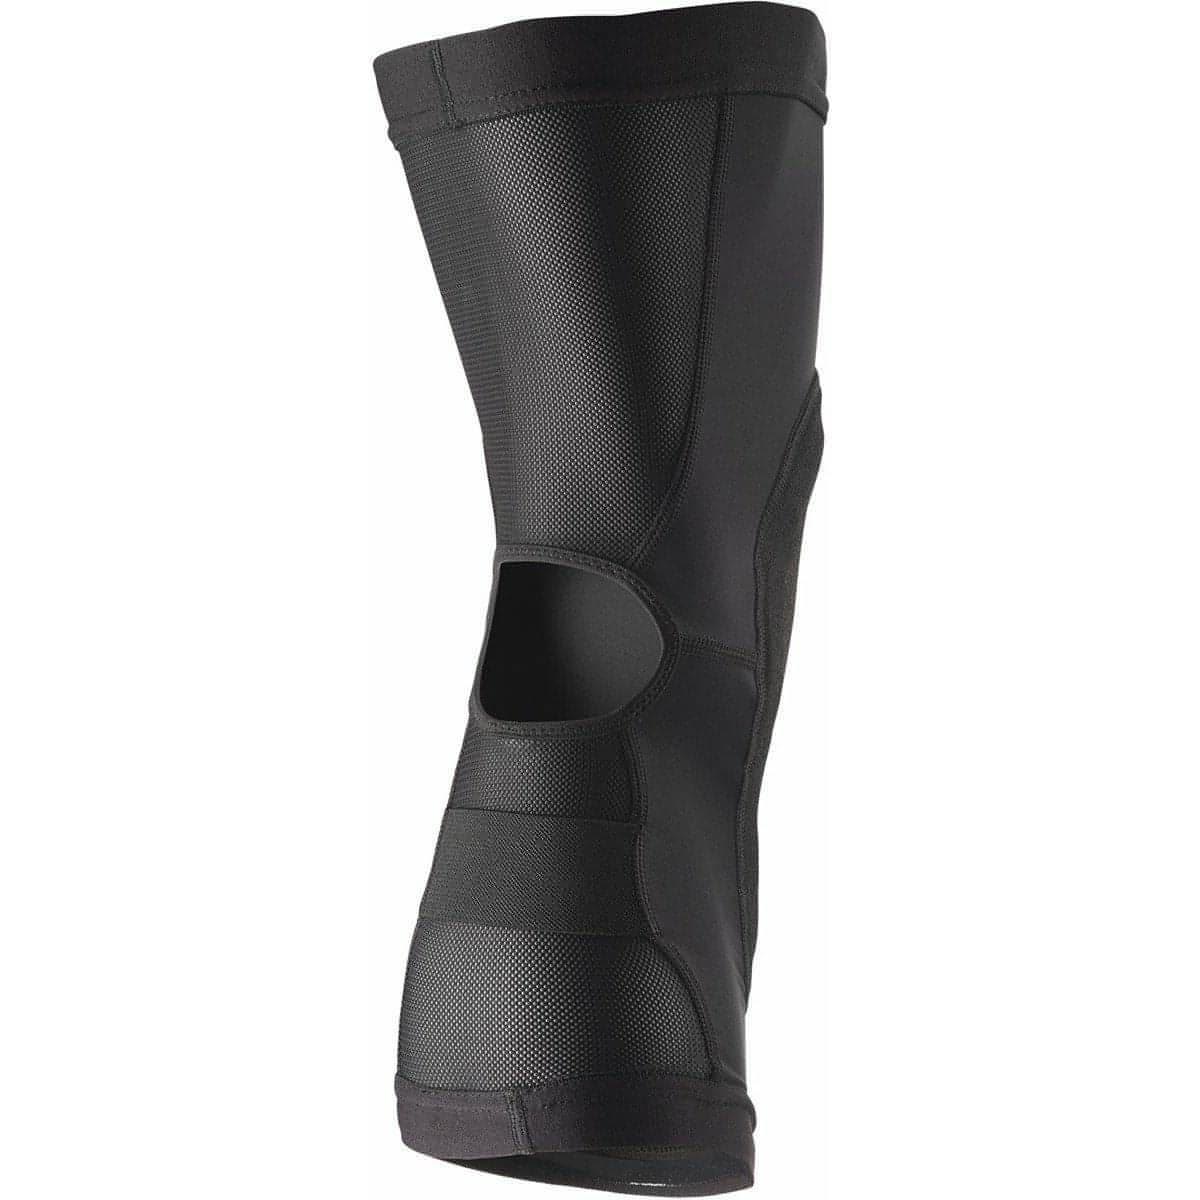 SixSixOne Recon V2 Cycling Knee Guards - Black - Start Fitness